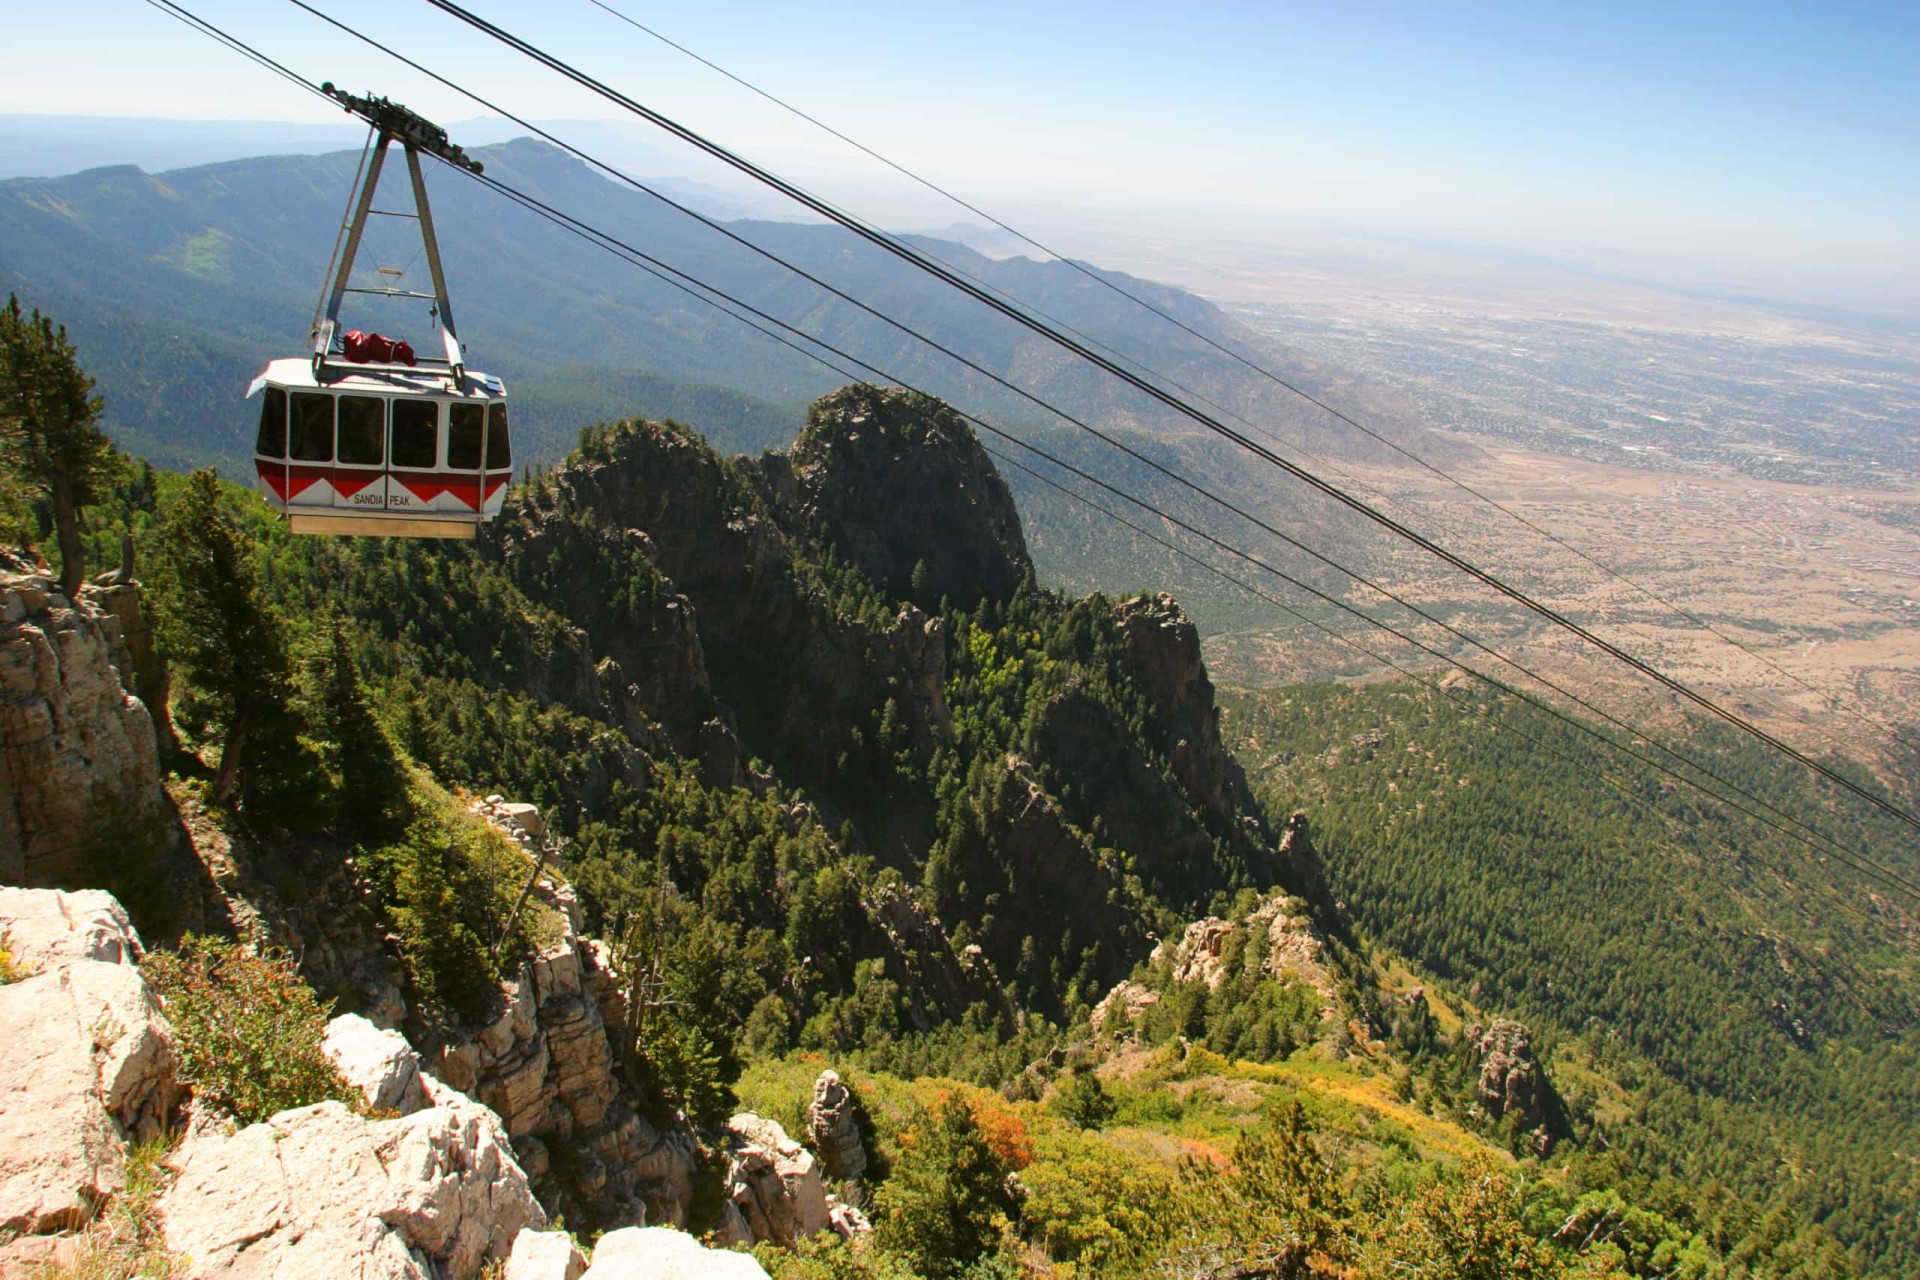 <p>If hiking isn't your thing, no worries. Sandia Peak Tramway adjacent to Albuquerque stretches from the northeast edge of the city to Sandia Peak on the ridge line of the Sandia Mountains. This is one of the world's longest passenger aerial tramways, and the longest in the Americas.</p>